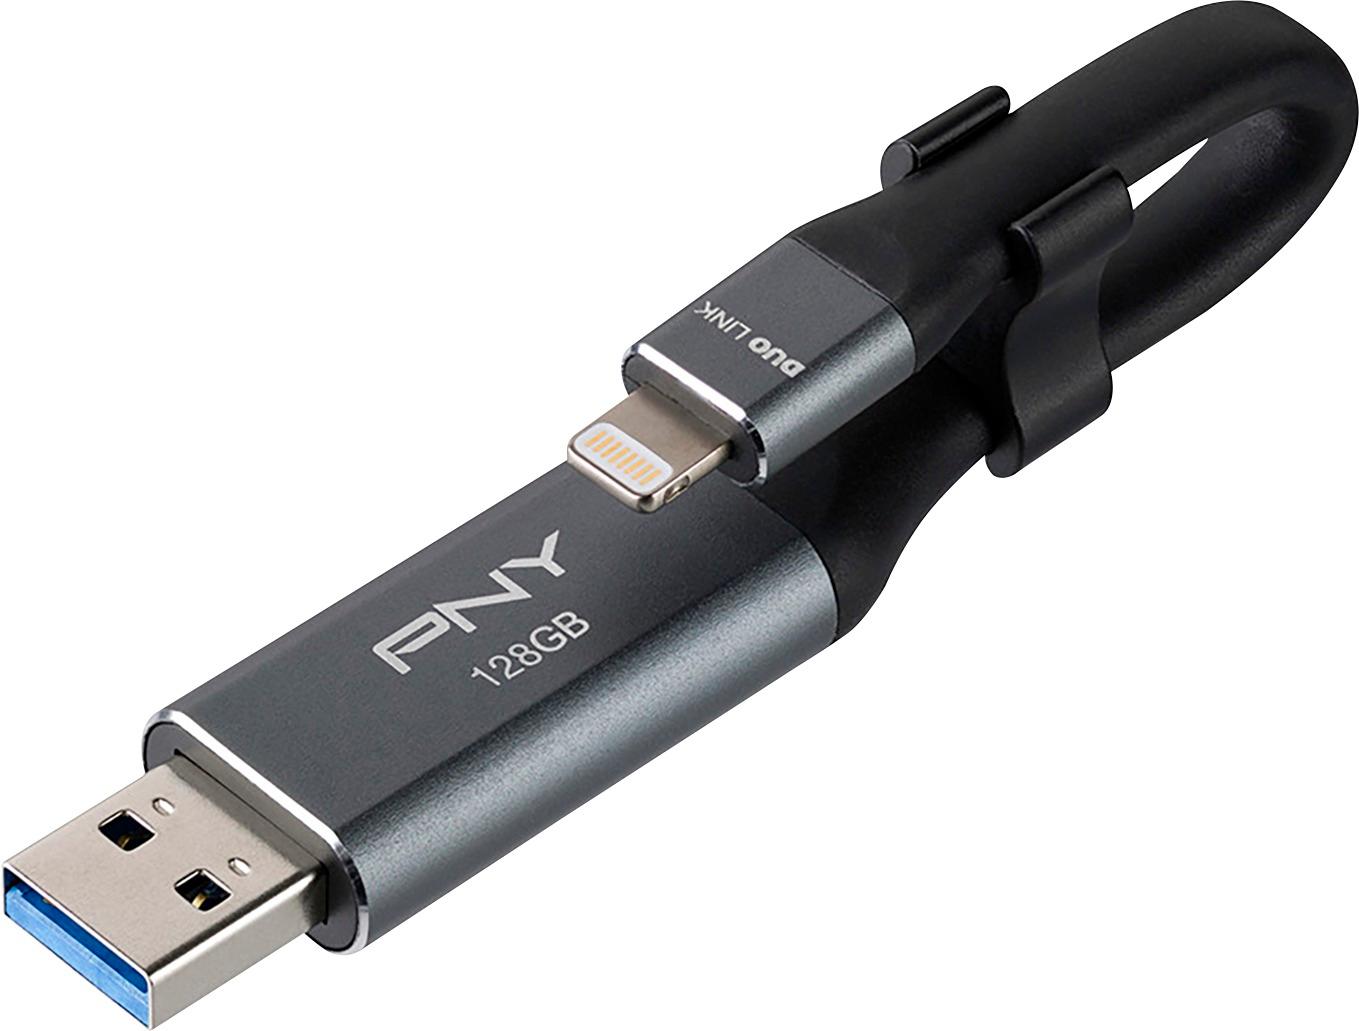 PNY - Duo-Link On-the-Go 128GB USB 3.0, Apple Lightning Flash Drive - Metal gray was $79.99 now $39.99 (50.0% off)